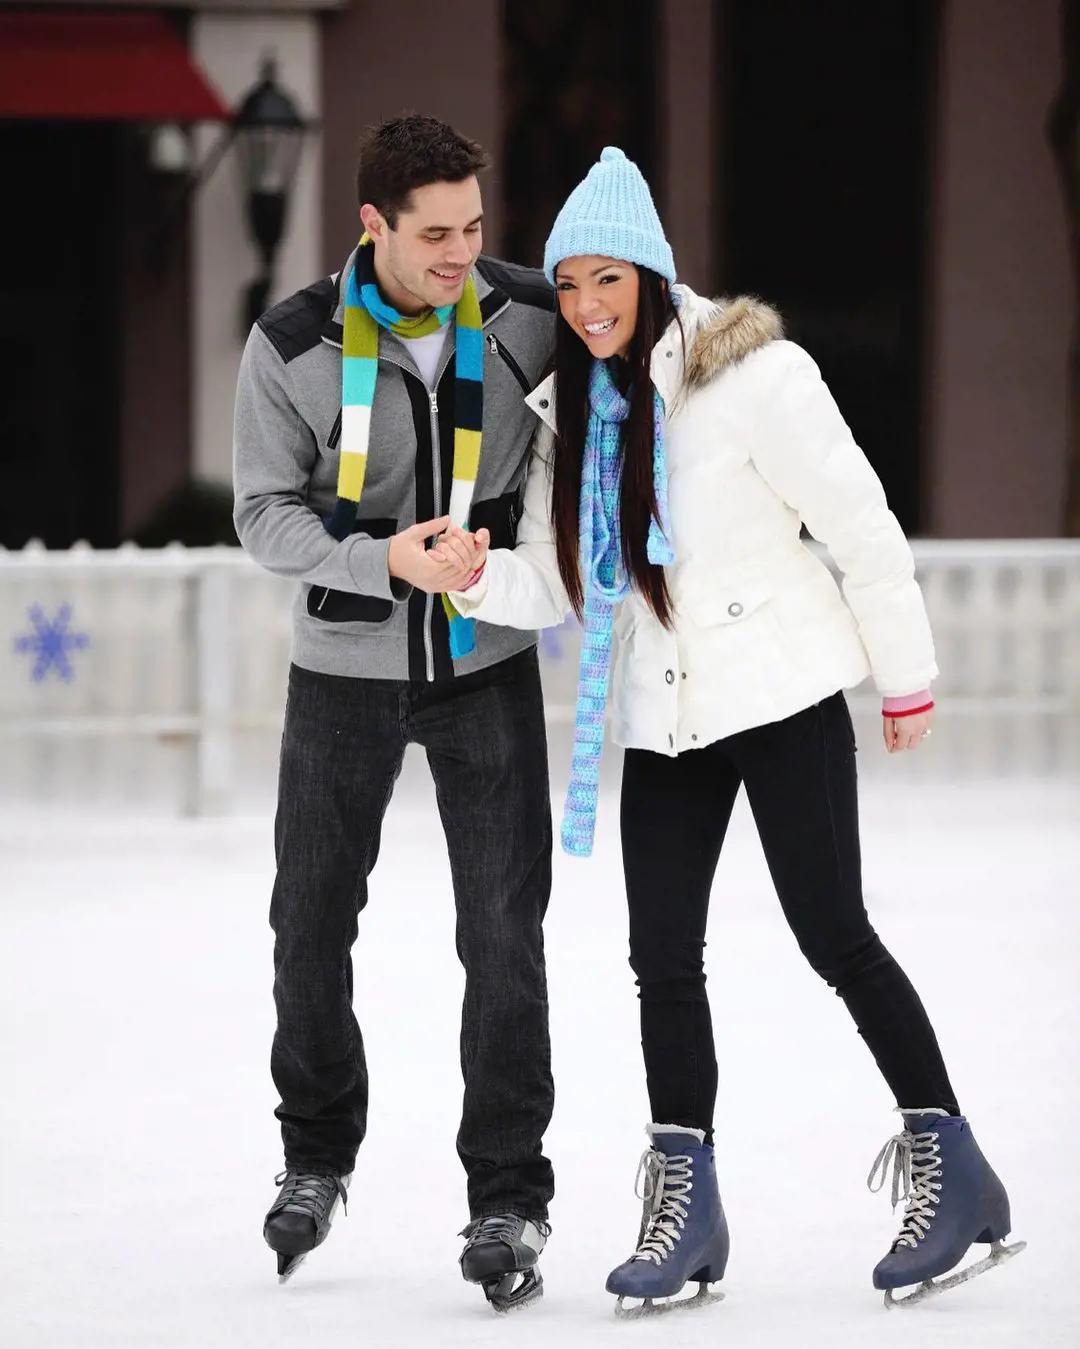 If you both know how to ice skate or are still in your learning phase, it is a cute date idea.